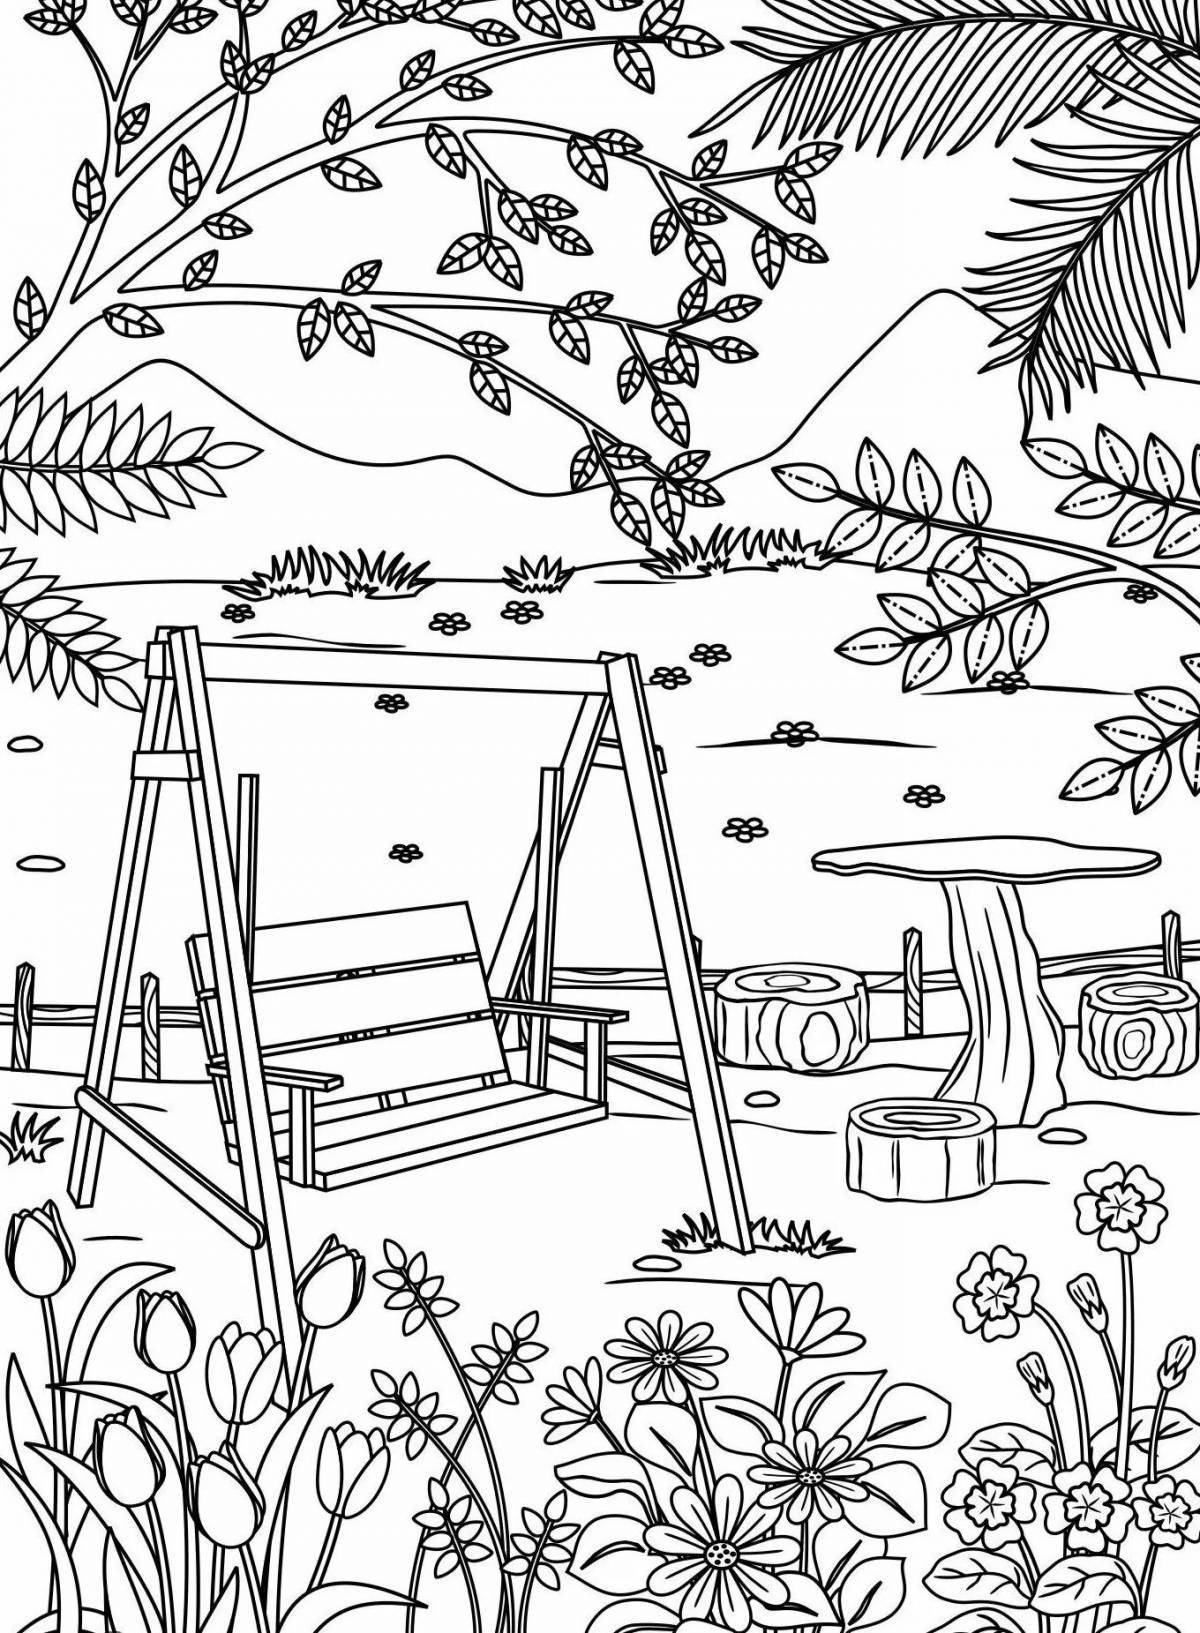 Rampant park coloring pages for kids